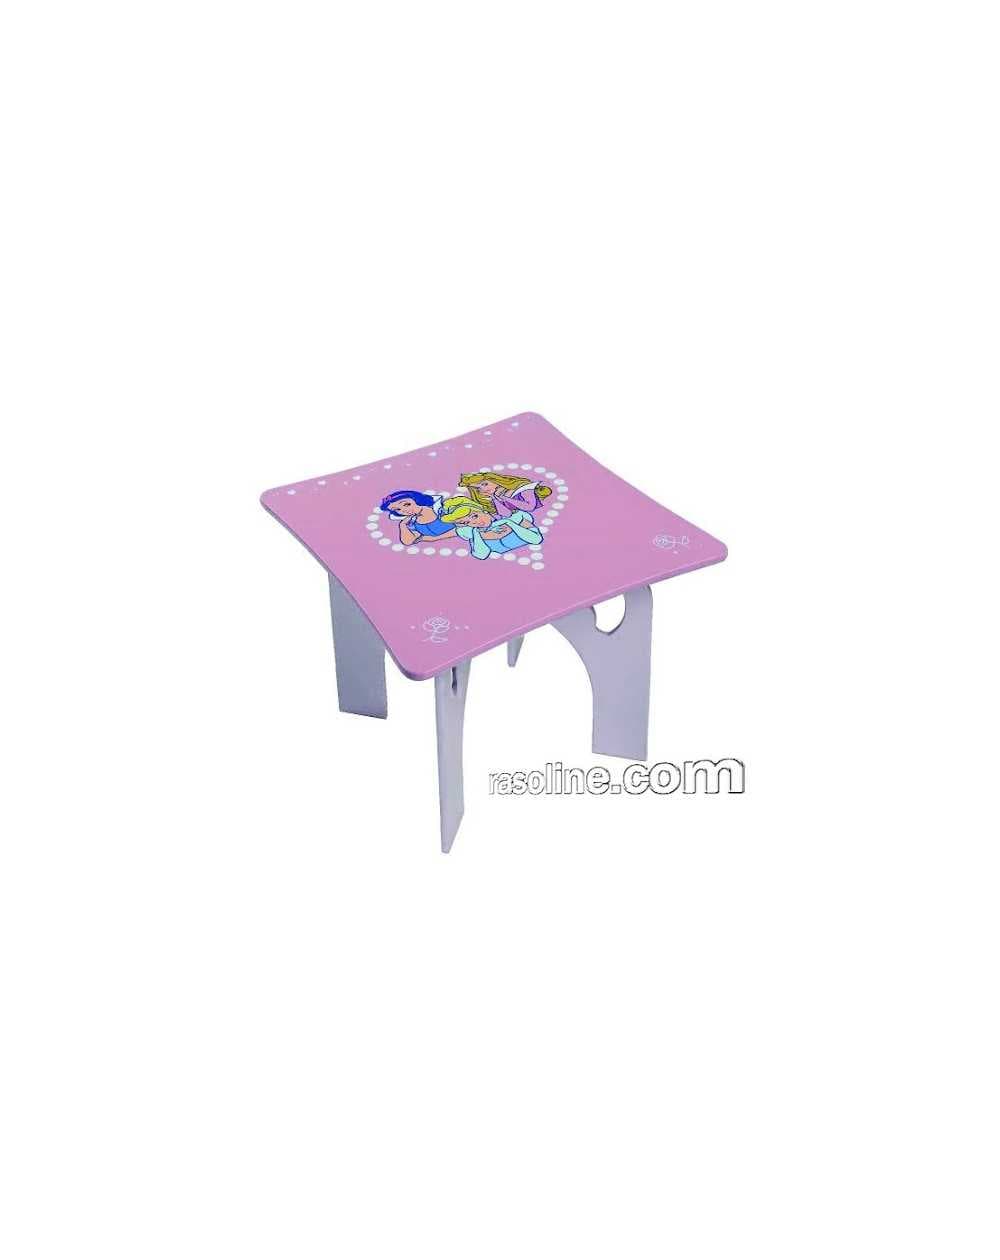 TABLE WOODEN PRINCESS